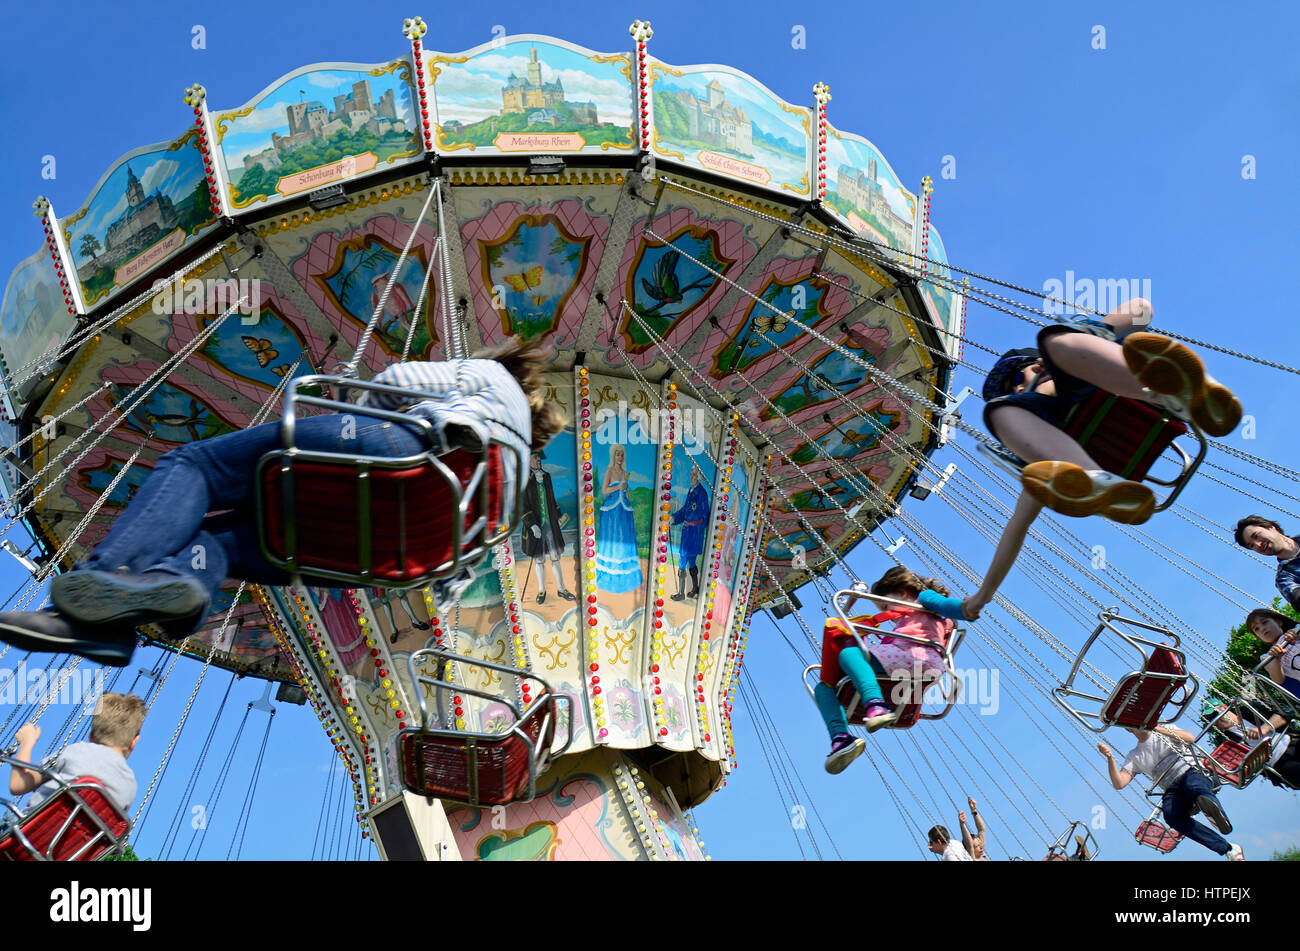 Amusement with a old carousel on festival 'Baumblütenfest' Werder (Havel) Brandenburg, Germany, Europe Stock Photo